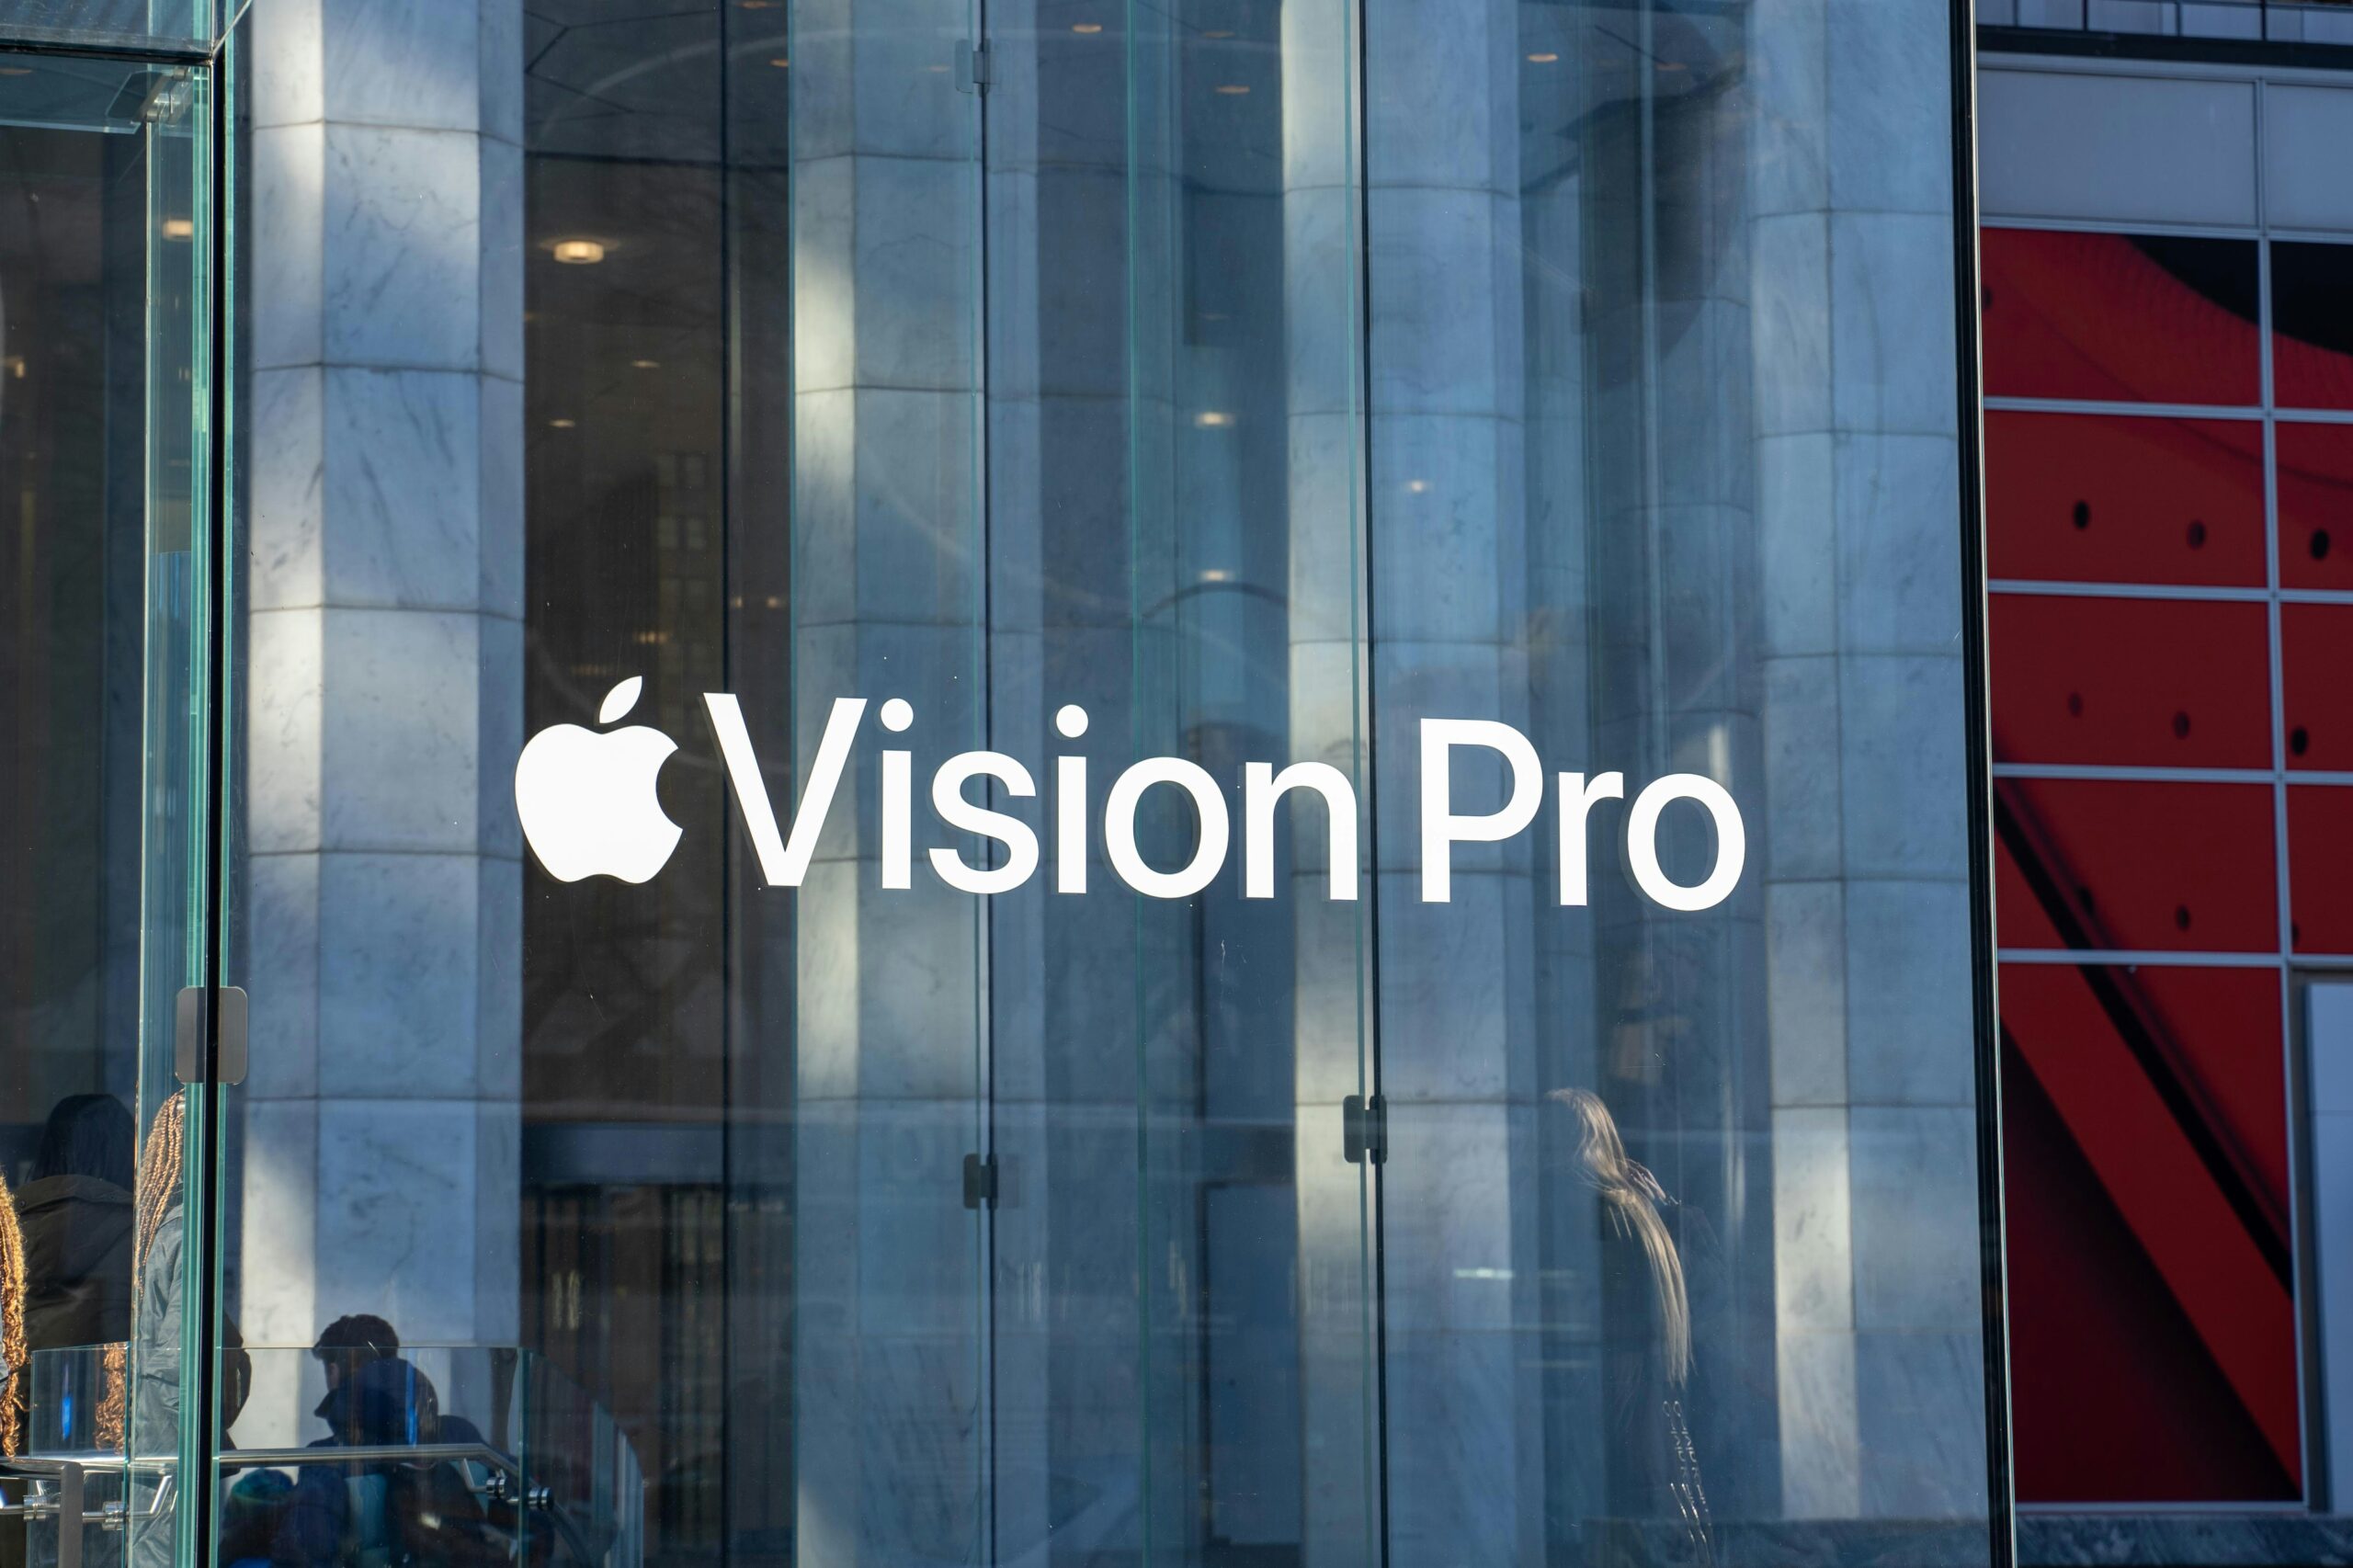 Apple started Apple Vision Pro shipping, which combines Virtual Reality and Augmented Reality